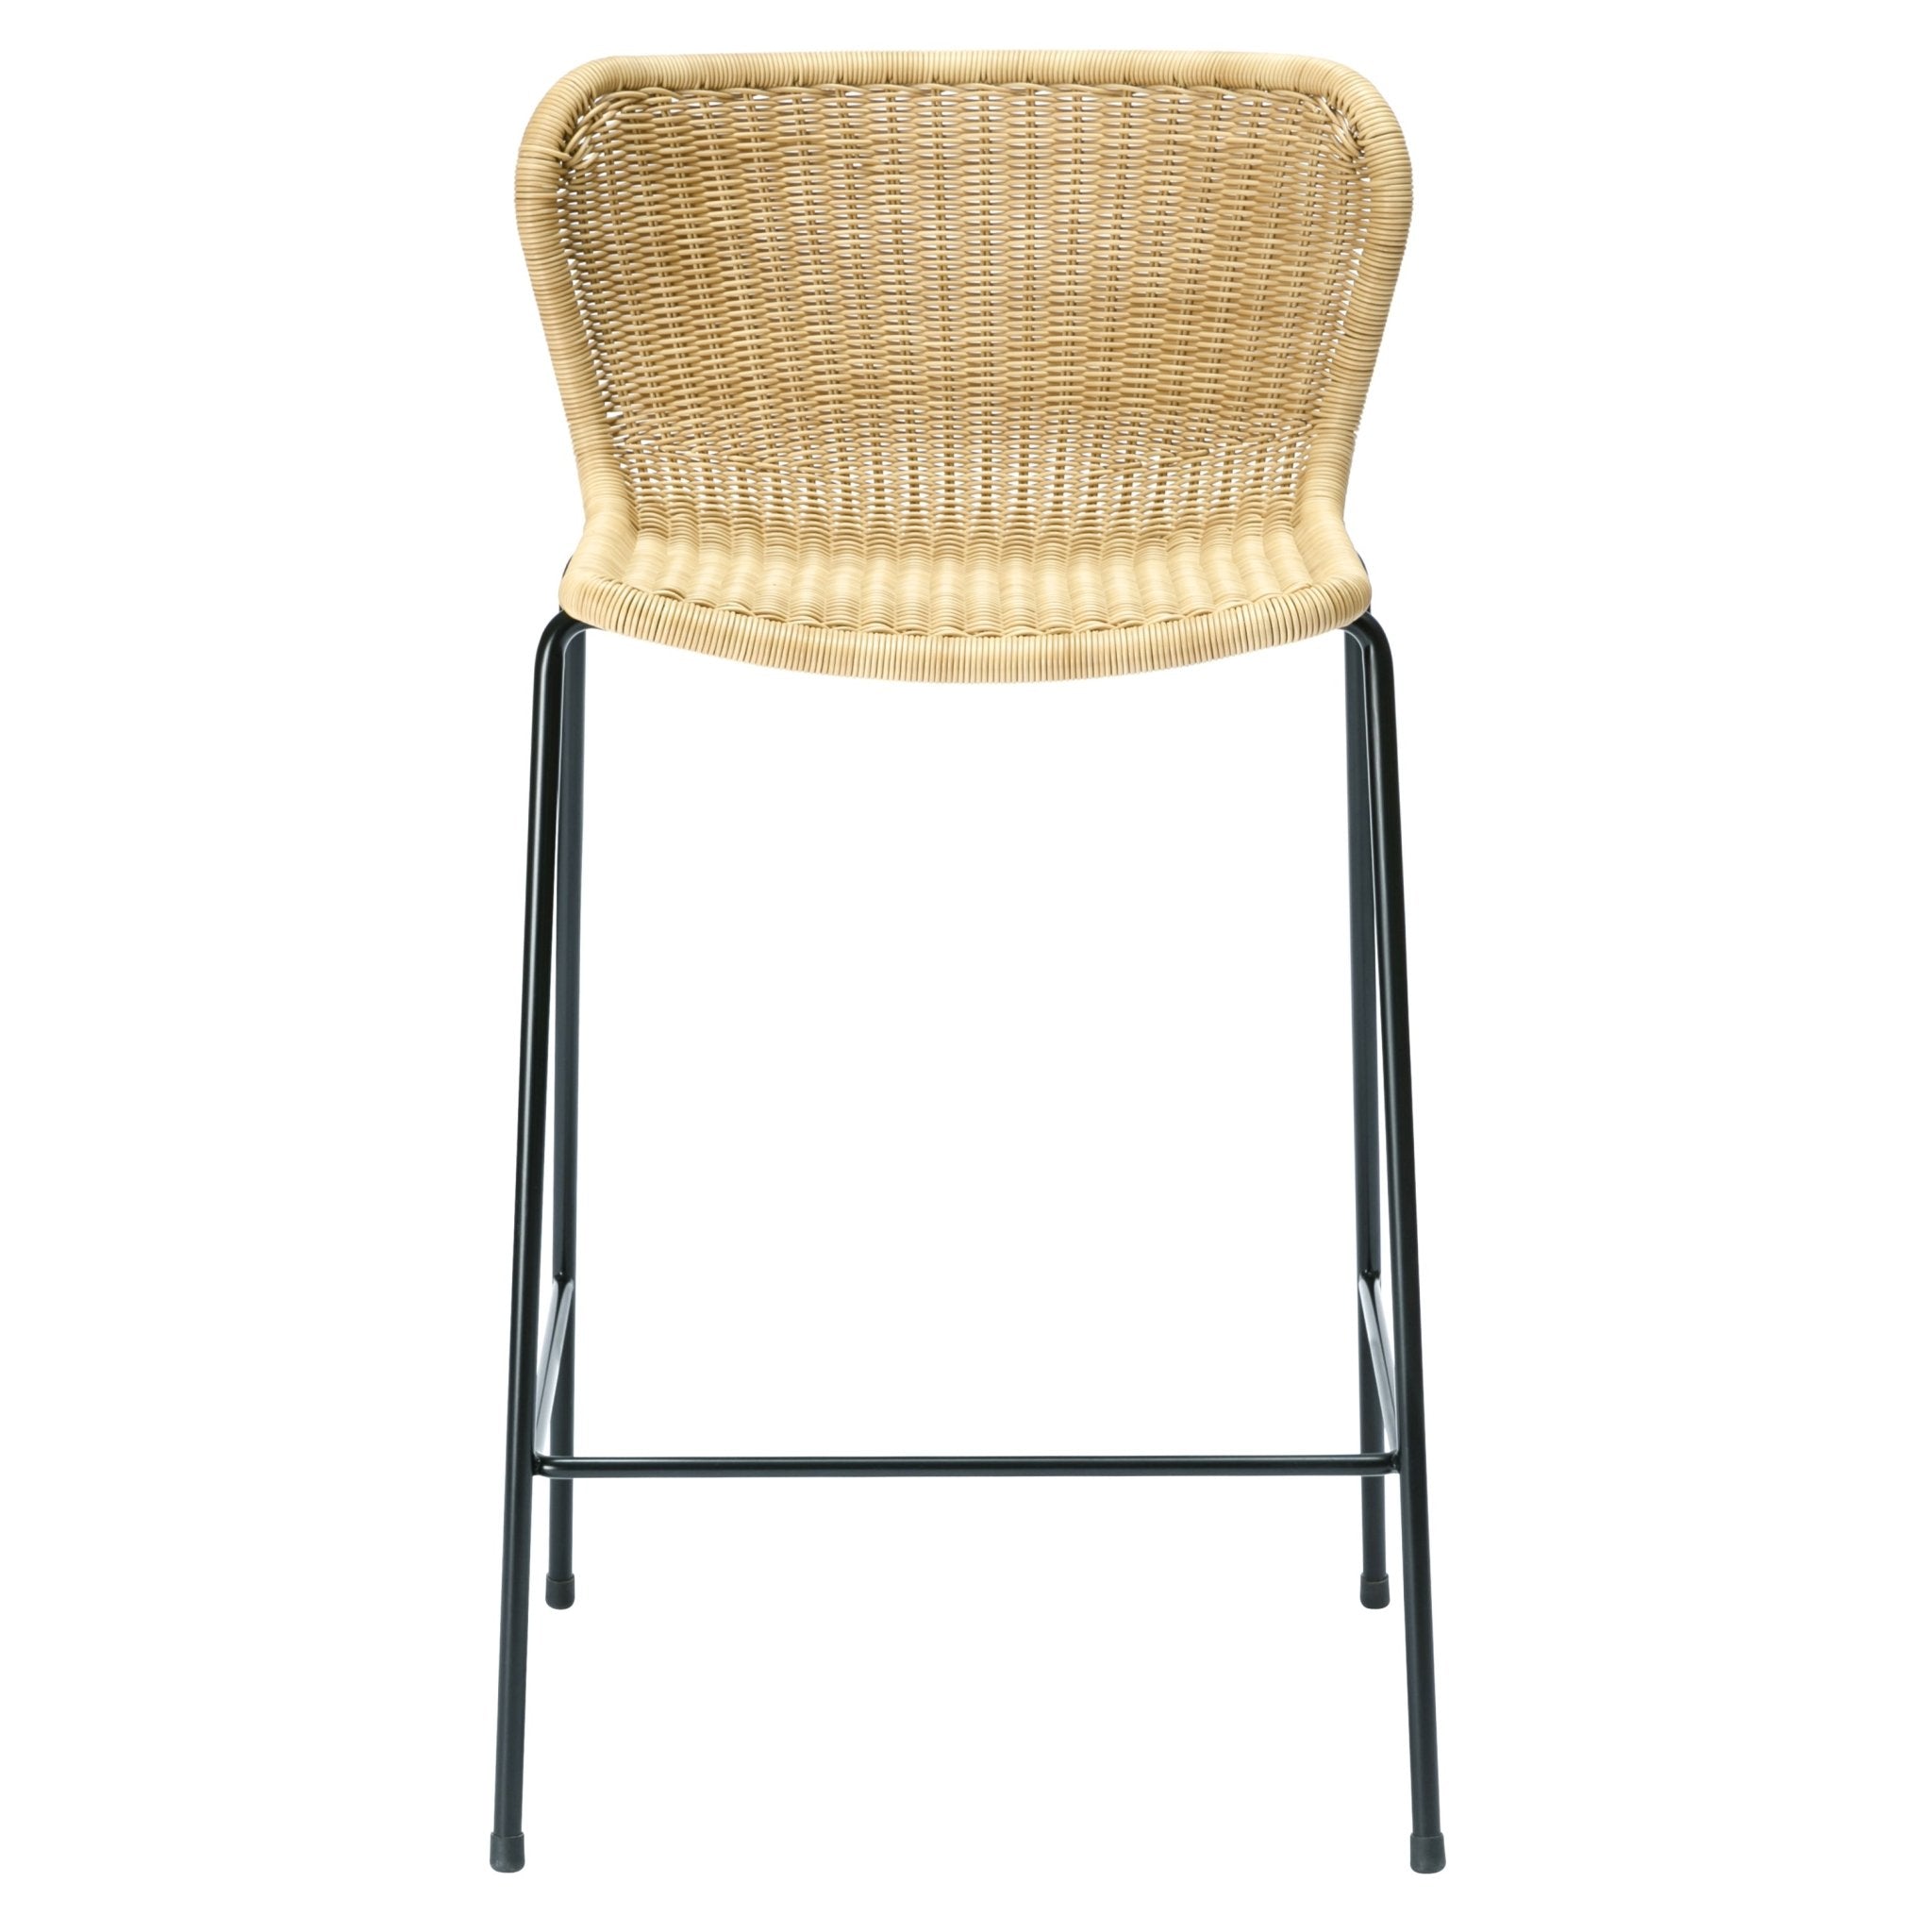 C603 Outdoor Counter Stool - Wheat